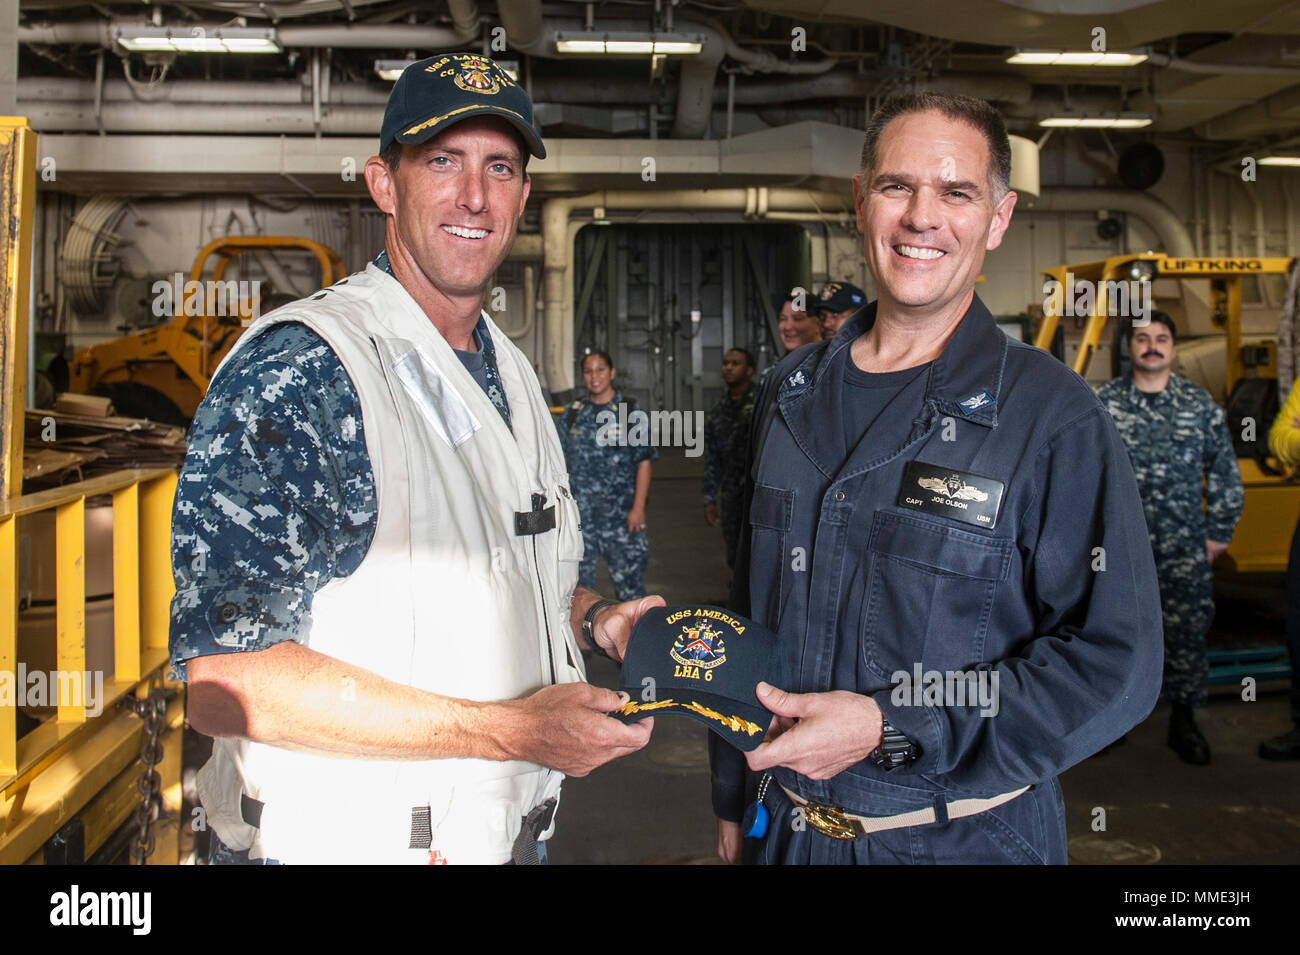 171024-N-ZS023-061 5TH FLEET AREA OF OPERATIONS (Oct. 24, 2017) Captain Joseph Olsen, the Commanding Officer of the amphibious assault ship USS America (LHA 6), and Captain Darren McPherson, the Commanding Officer of the Ticonderoga-class guided-missile cruiser USS Lake Erie (CG 70), pose for a photo in the America’s vehicle storage area. America is the flagship for the America Amphibious Ready Group and, with the embarked 15th Marine Expeditionary Unit, is deployed to the U.S. 5th Fleet area of operations in support of maritime security operations to reassure allies and partners and preserve  Stock Photo